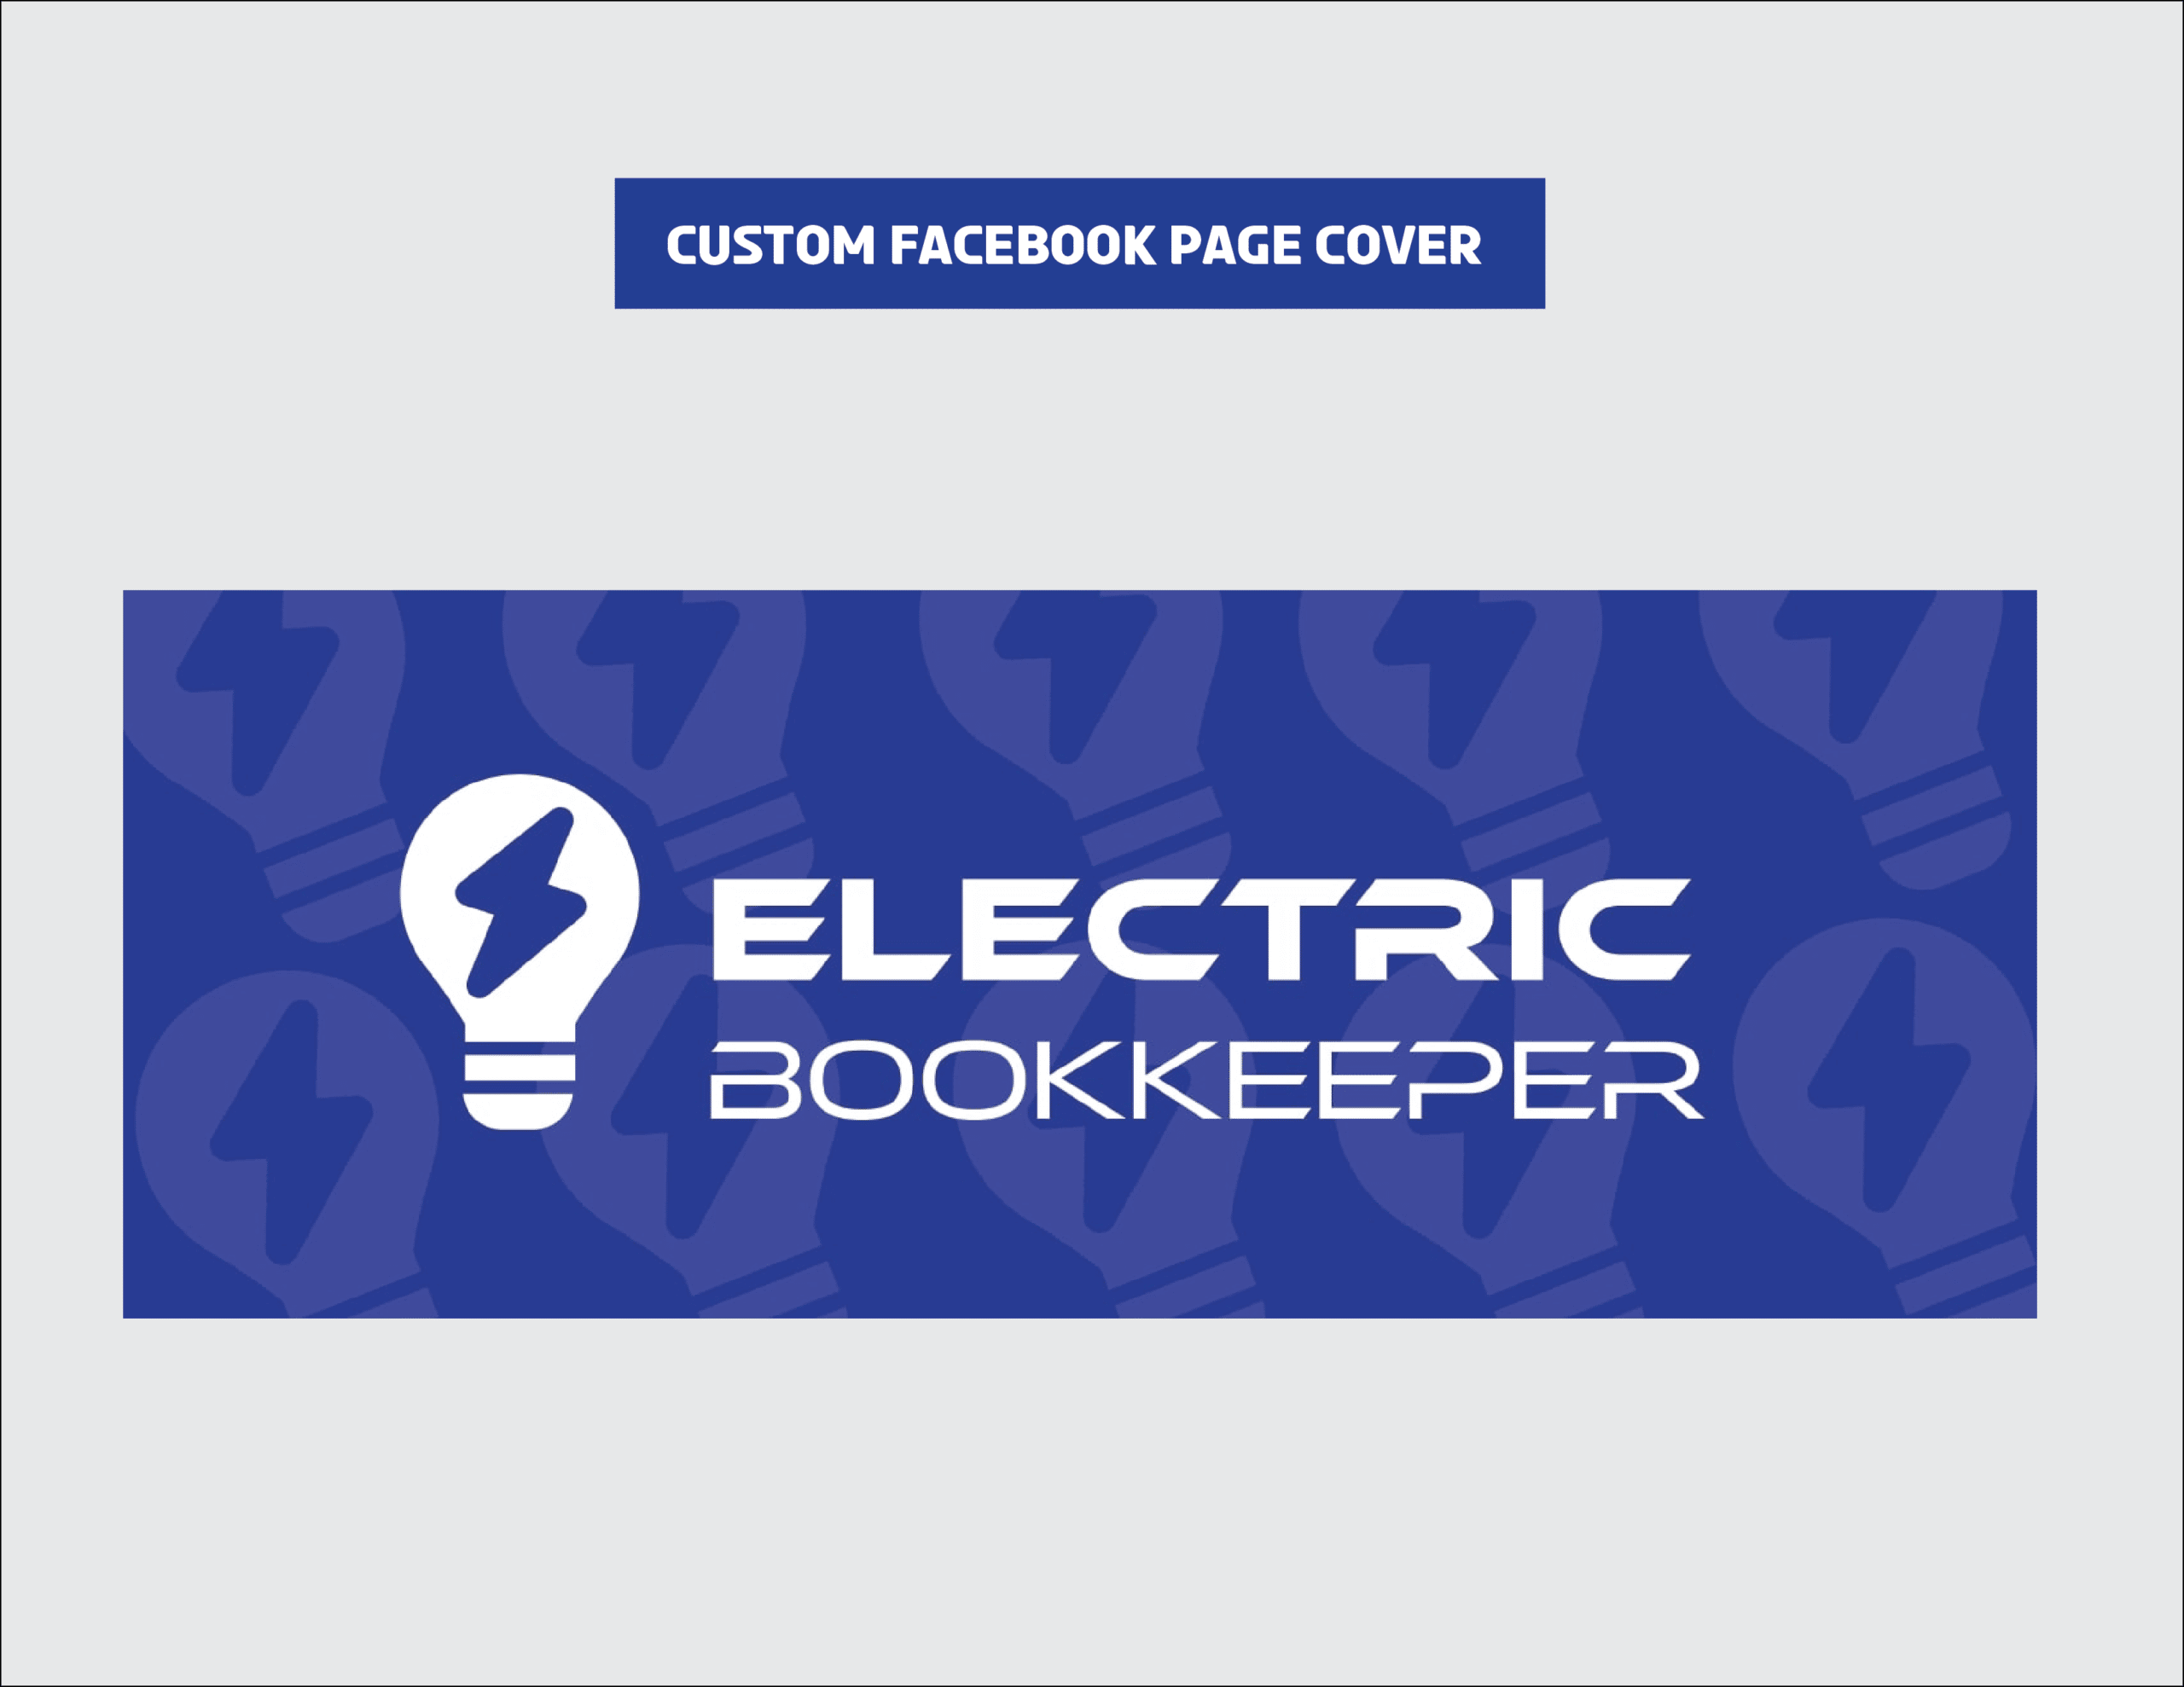 06_ElectricBookkeeper_Custom Facebook Page Cover